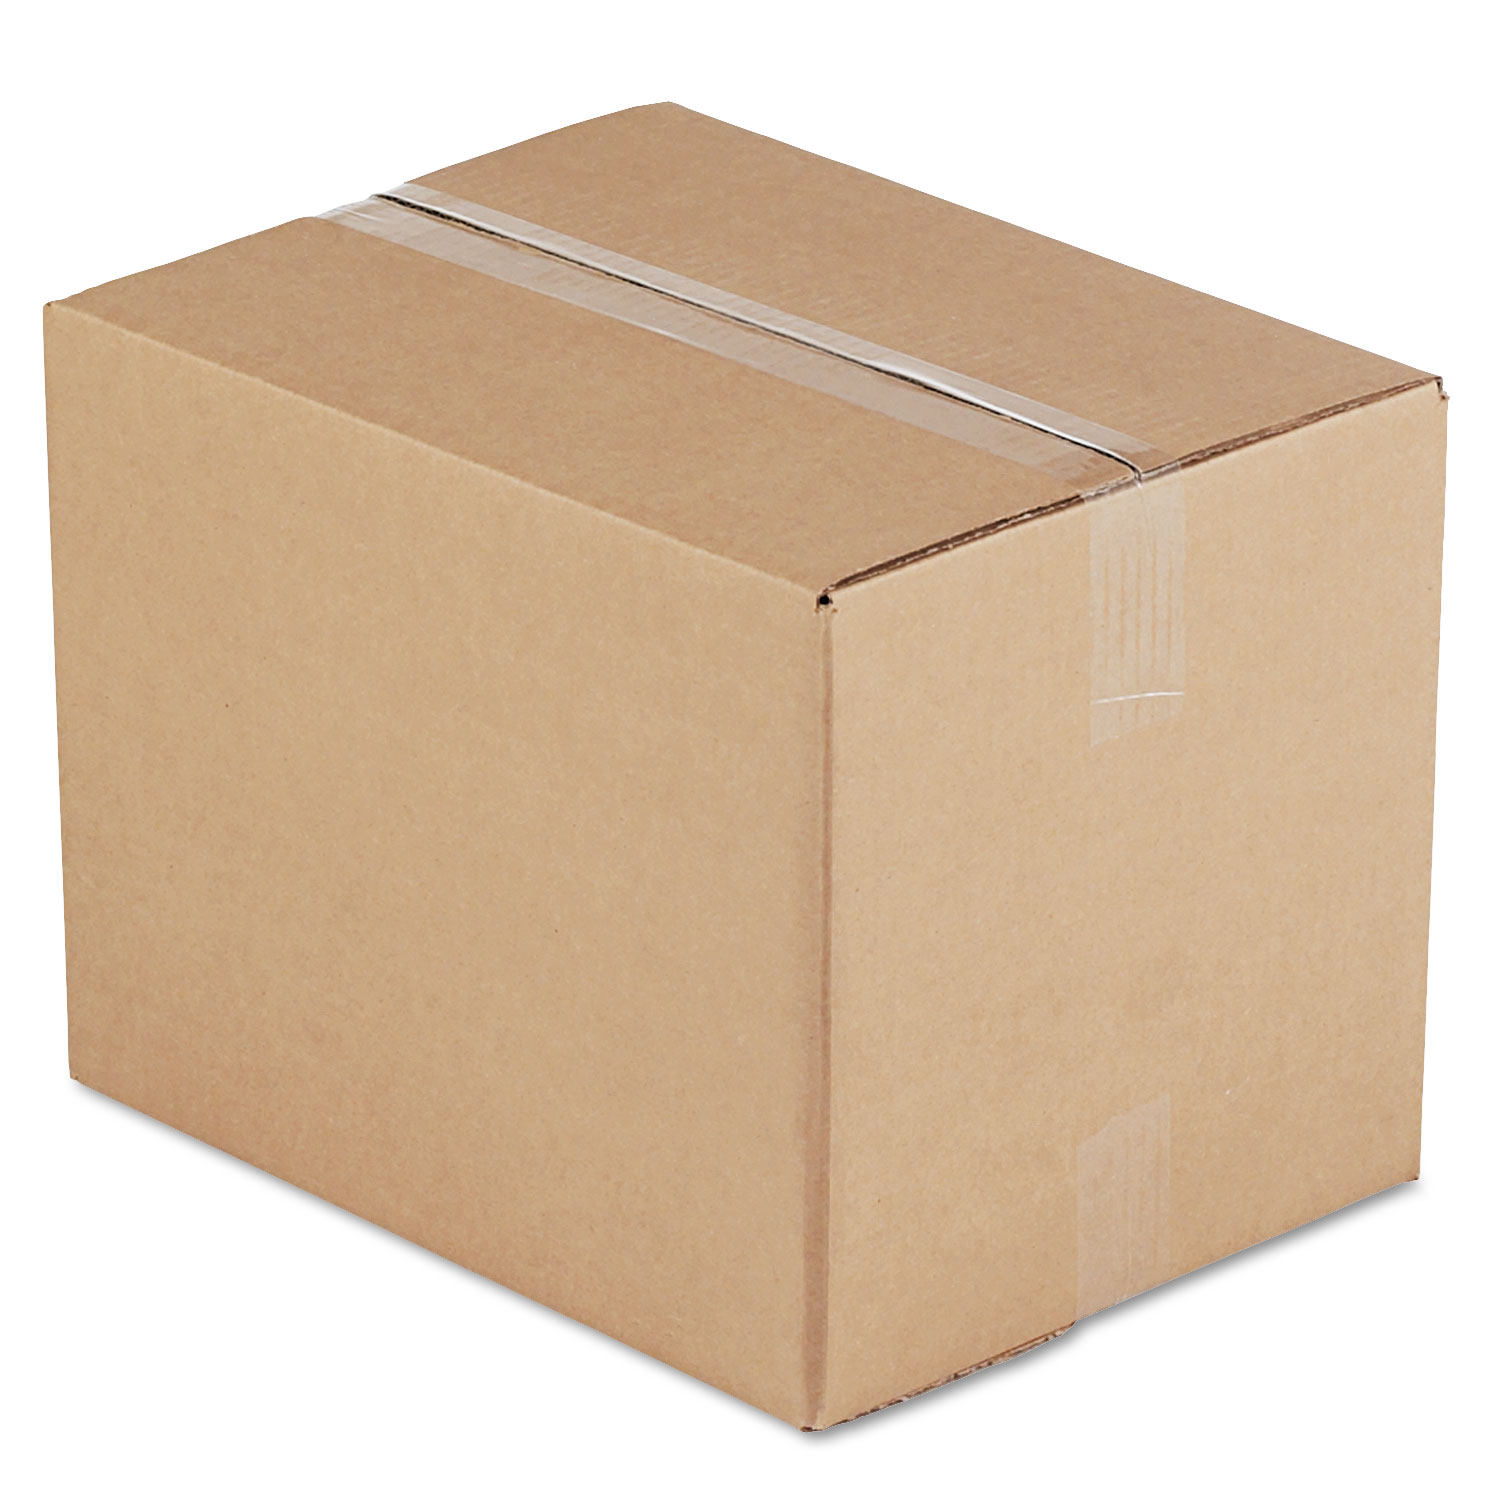 Fixed-Depth Shipping Boxes, Regular Slotted Container (RSC), 16